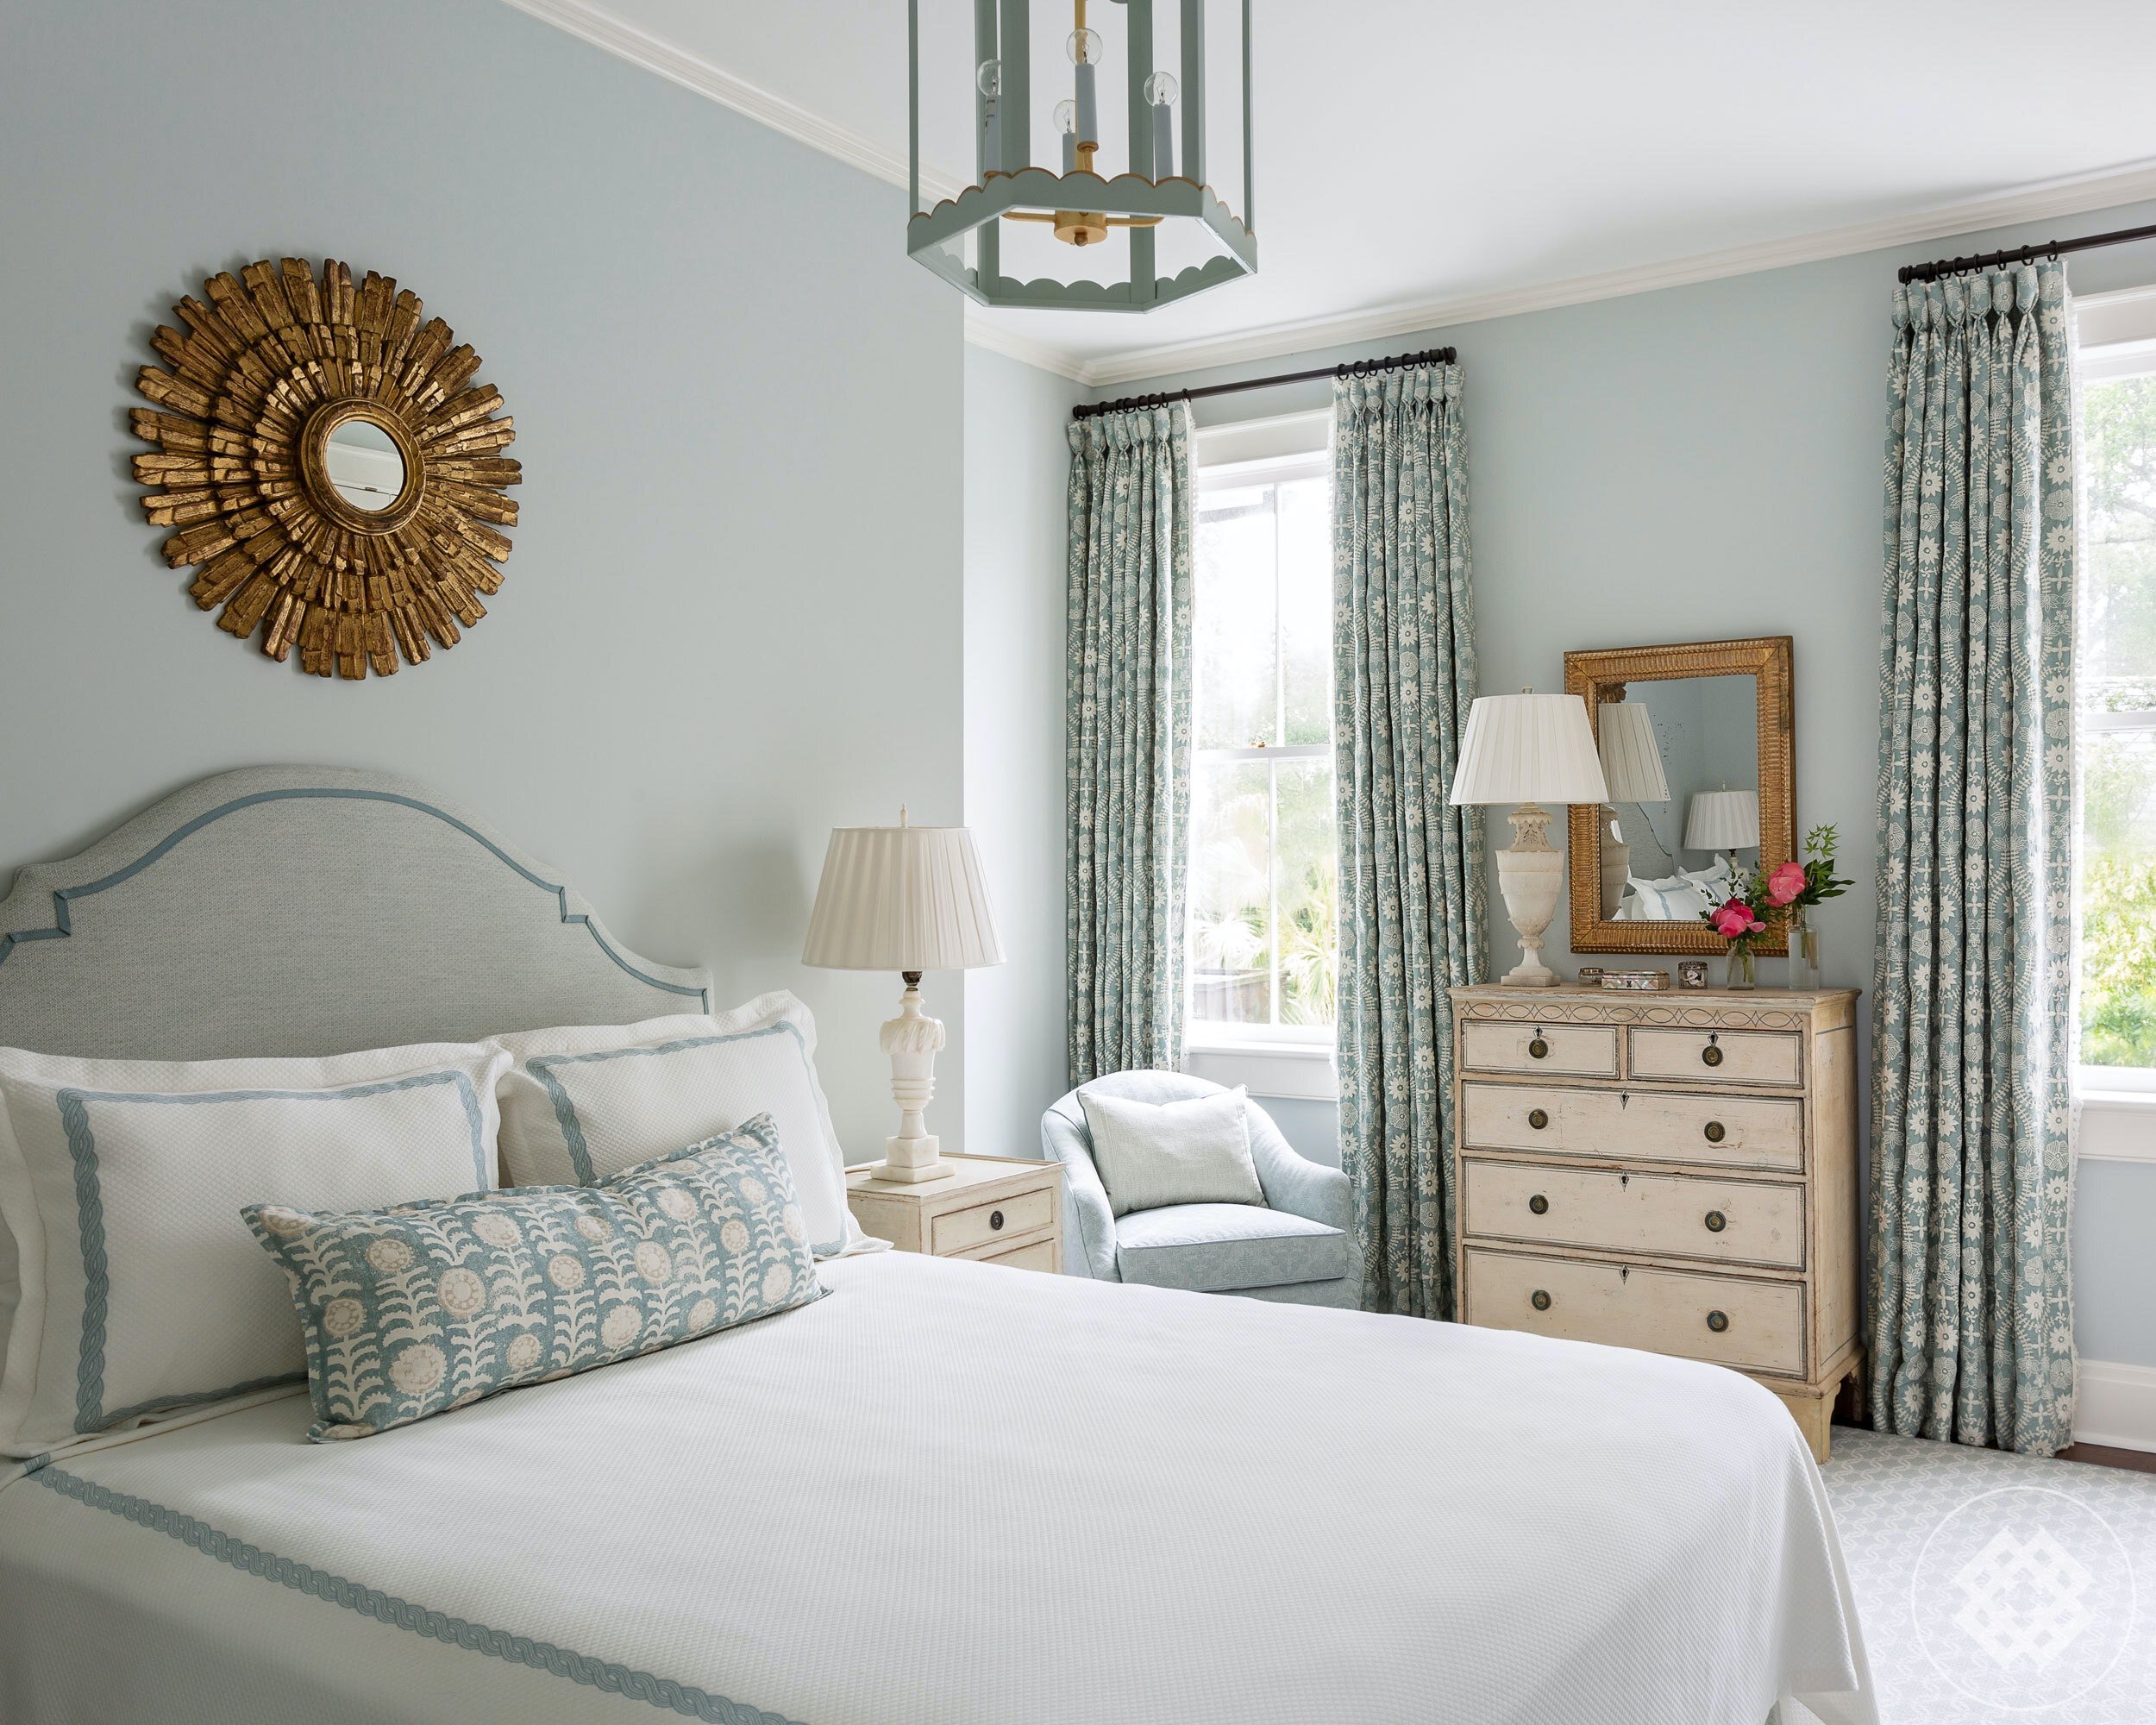 shc-18-crisp-linens-and-contrasting-antique-gilded-mirrors-make-this-charleston-guest-room-a-relaxing-retreat.jpg